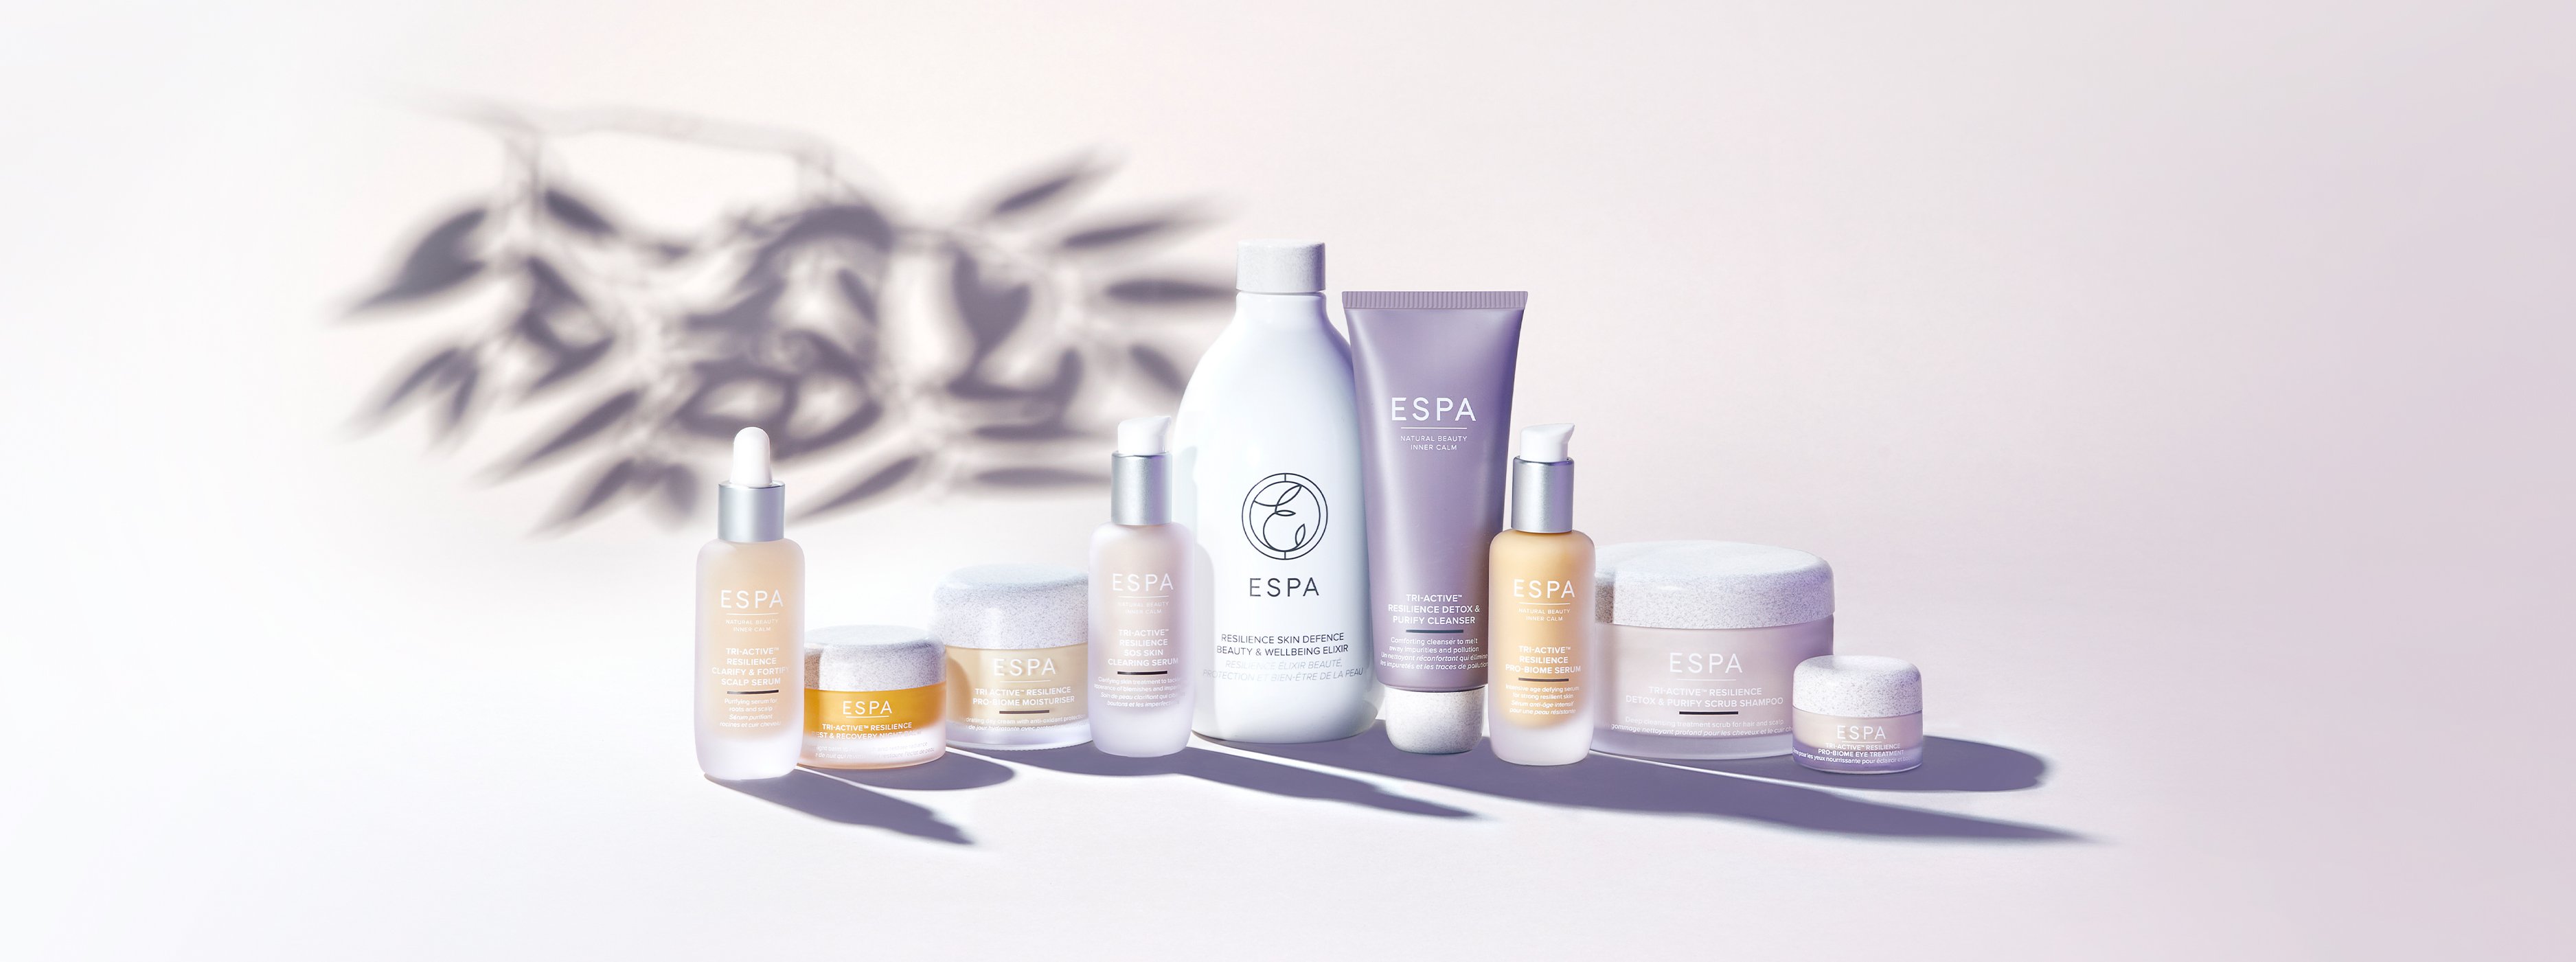 ESPA products in a row with a plant reflection